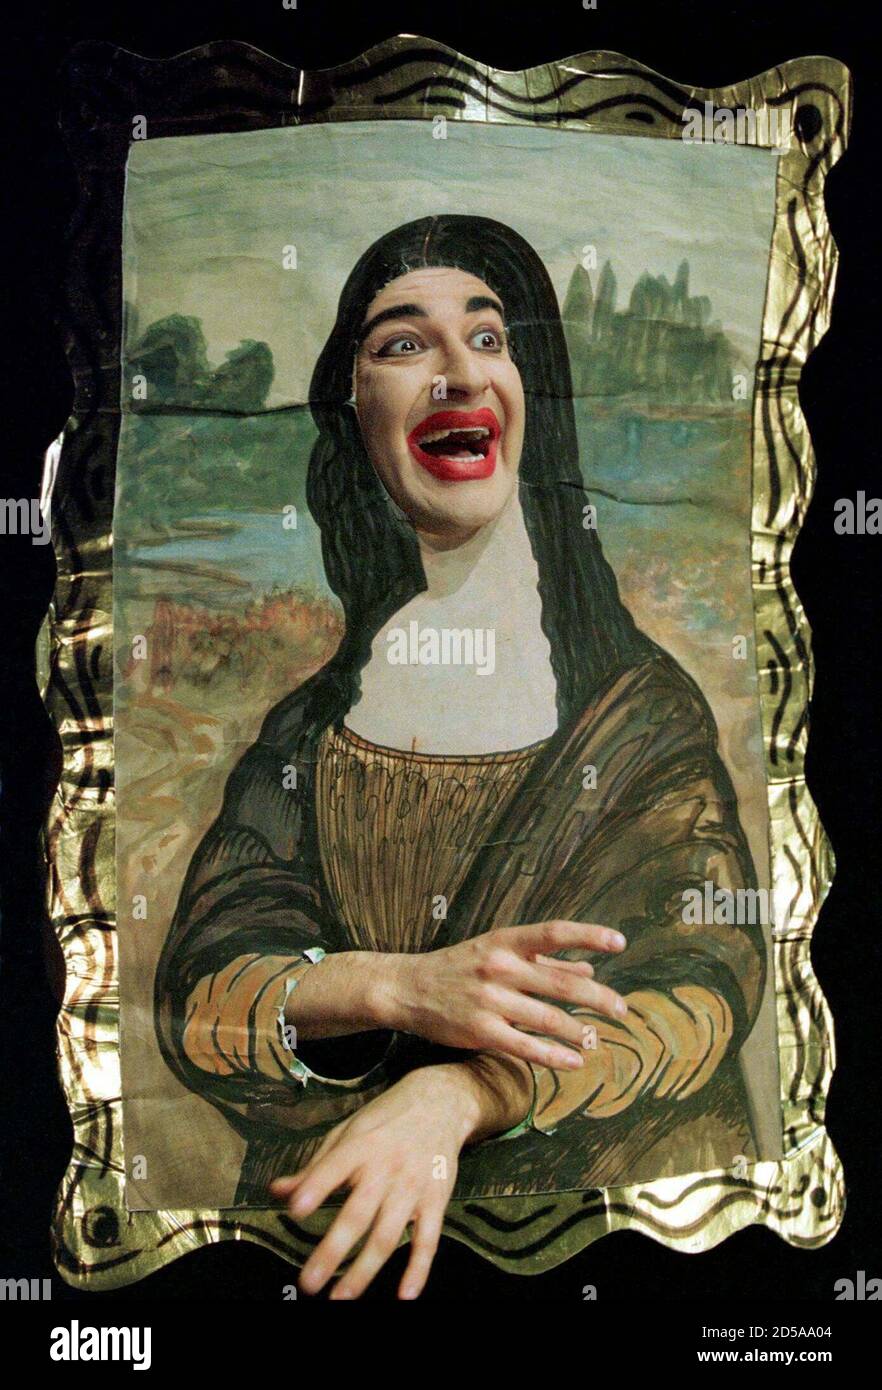 Italian comedian Ennio Marchetto portrays the famous Mona Lisa by painter  Leonardo da Vinci during a rehearsal at the Hong Kong Cultural Centre  November 30. The award-winning comedian, widely regarded as a 